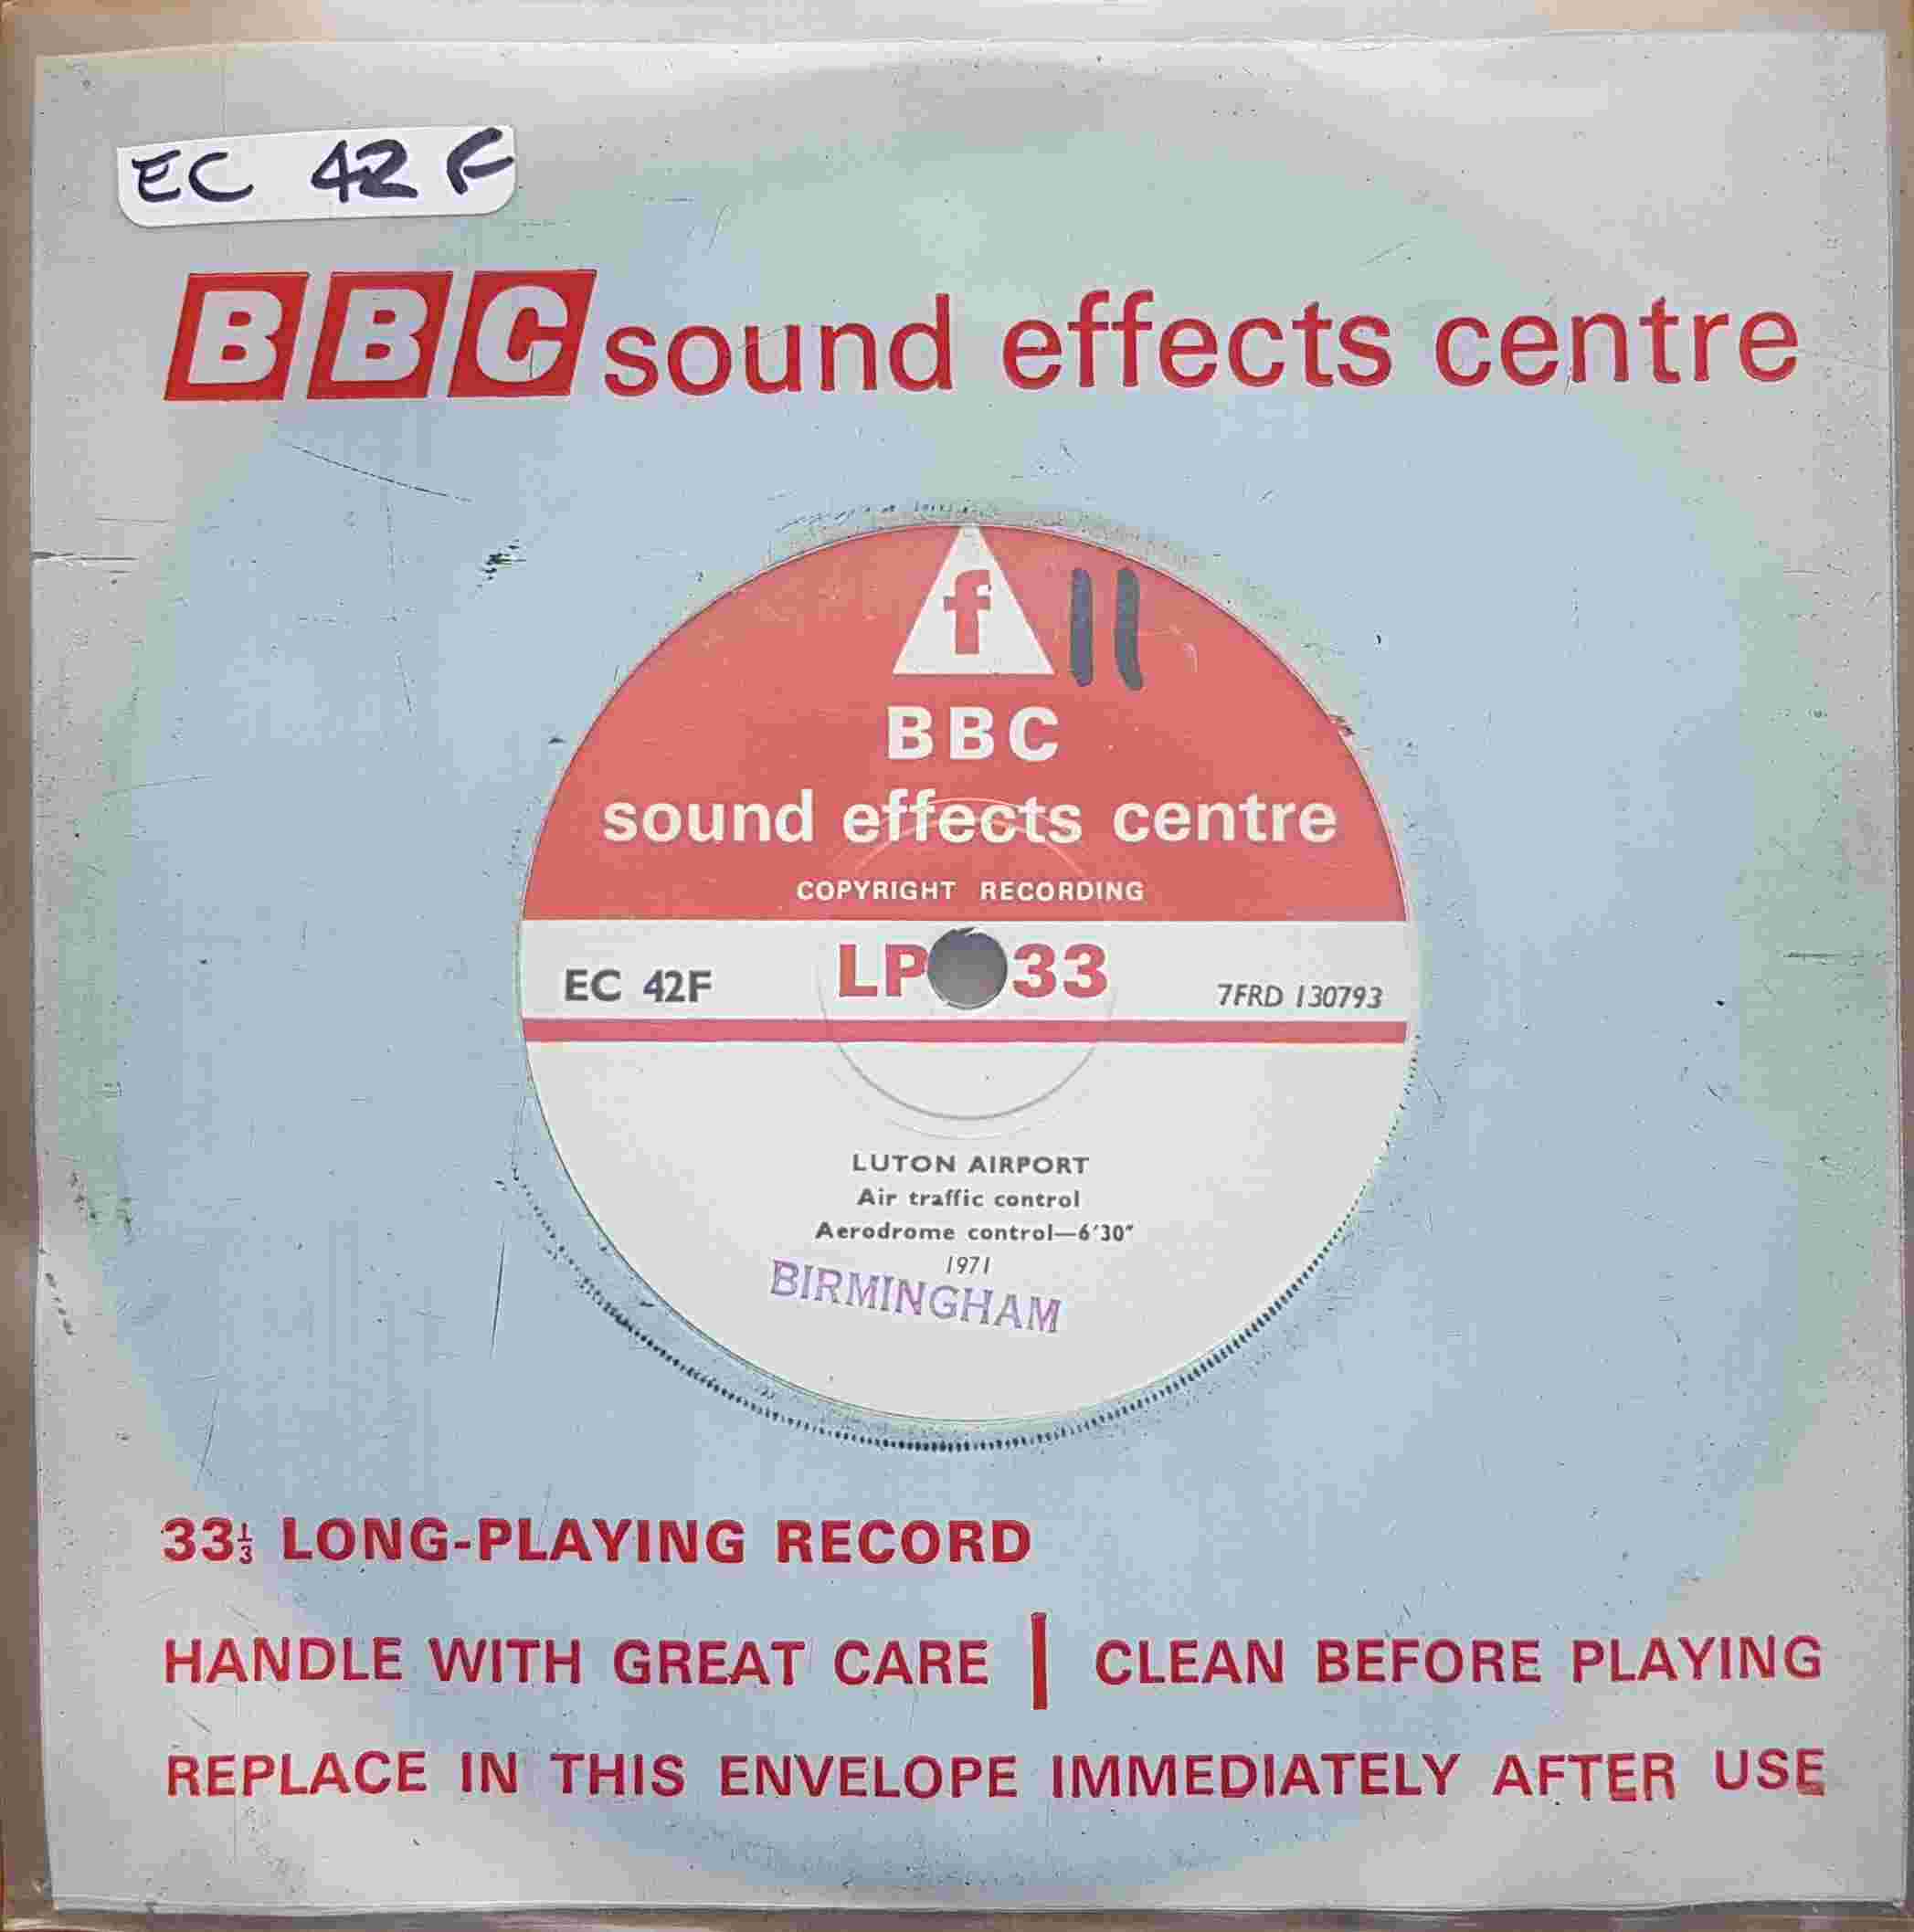 Picture of EC 42F Luton airport - Air traffic control 1971 by artist Not registered from the BBC records and Tapes library